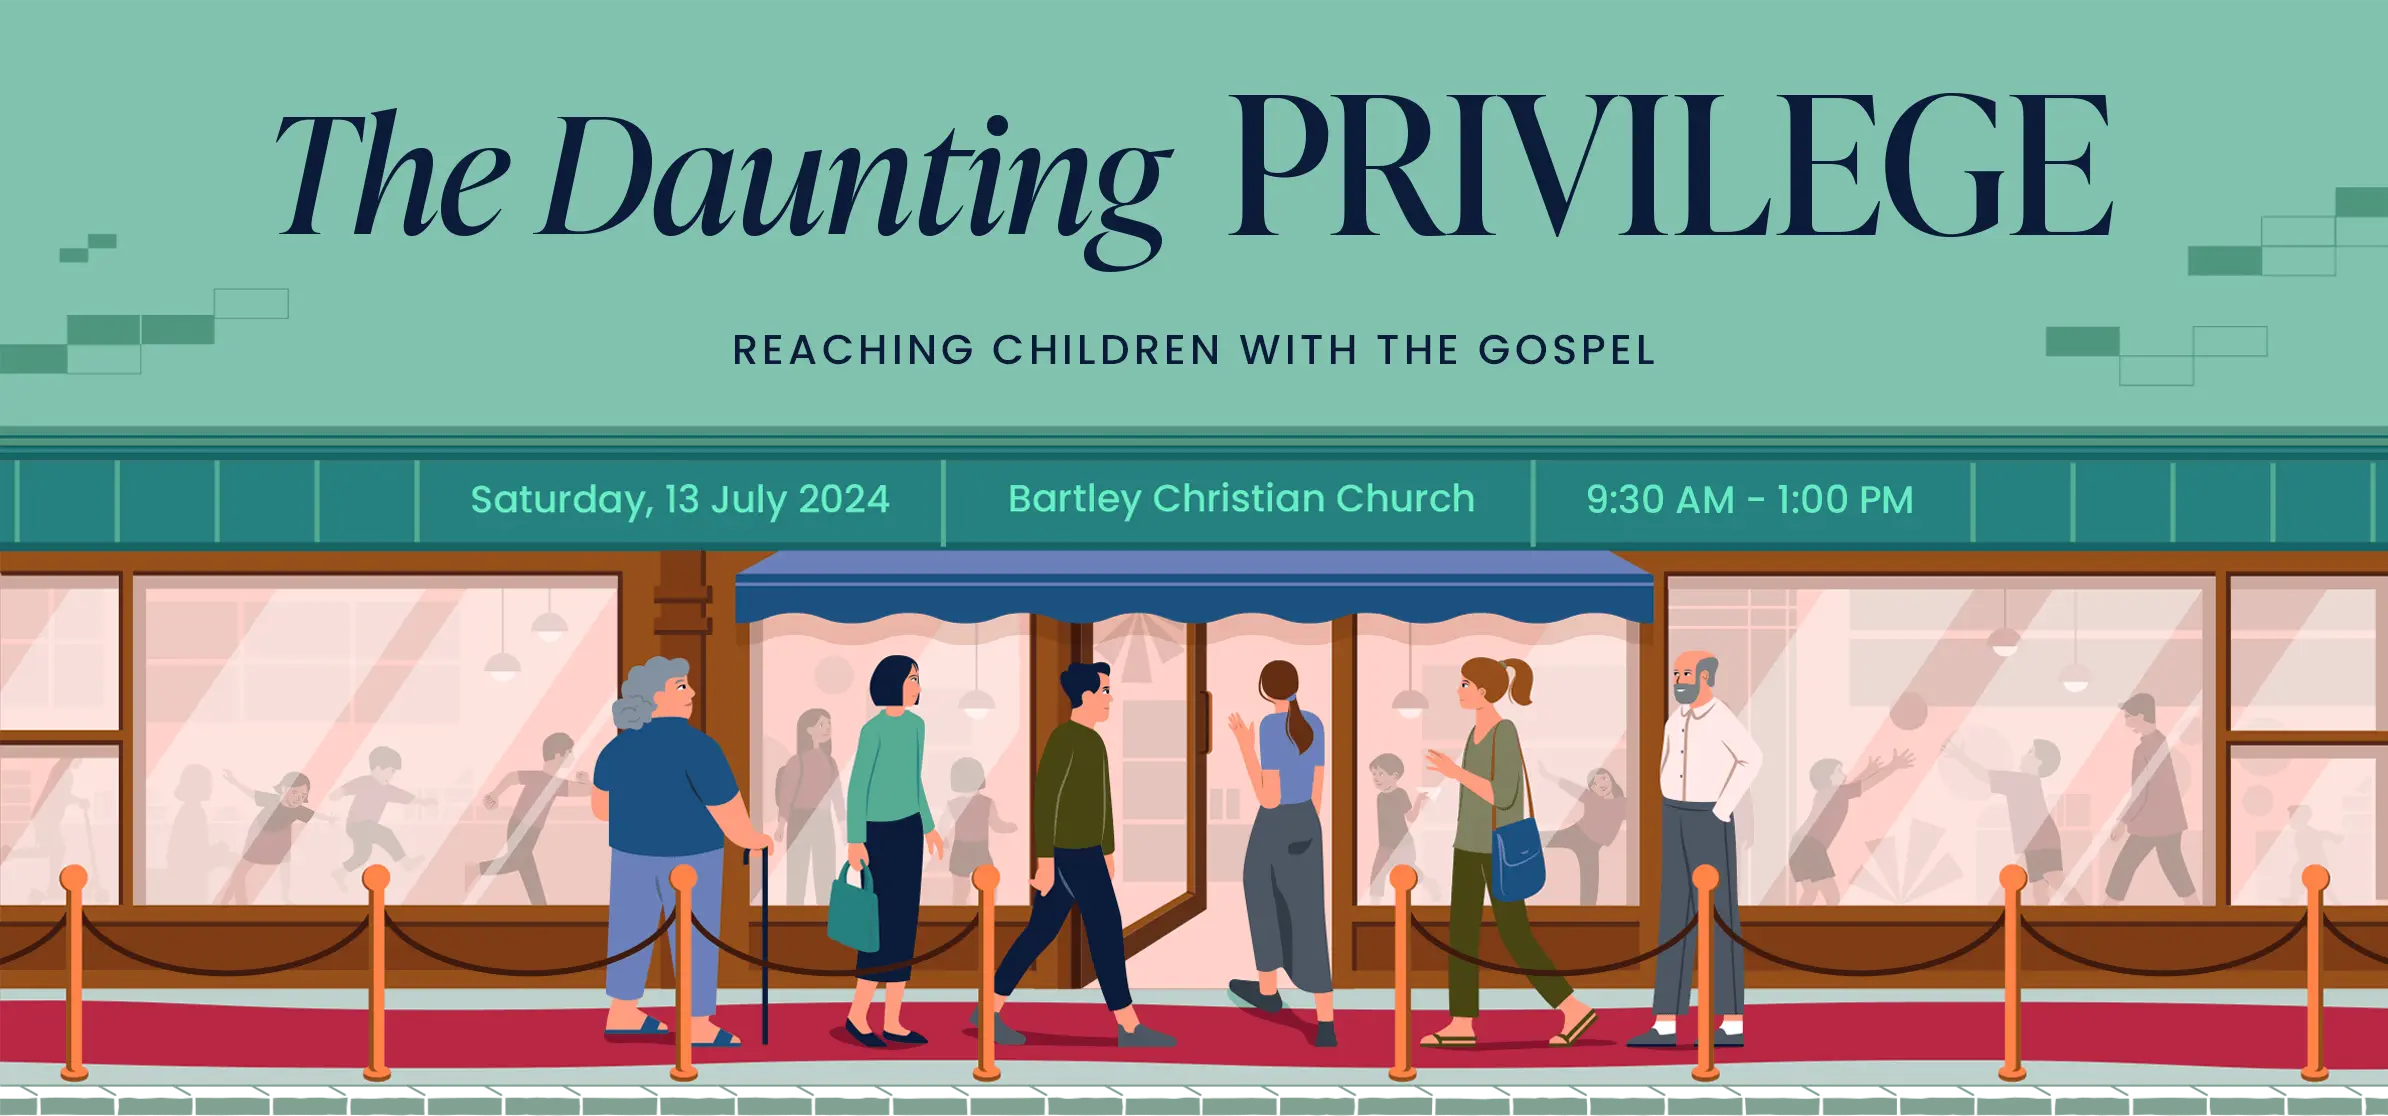 The Daunting Privilege. Reaching Children with The Gospel.